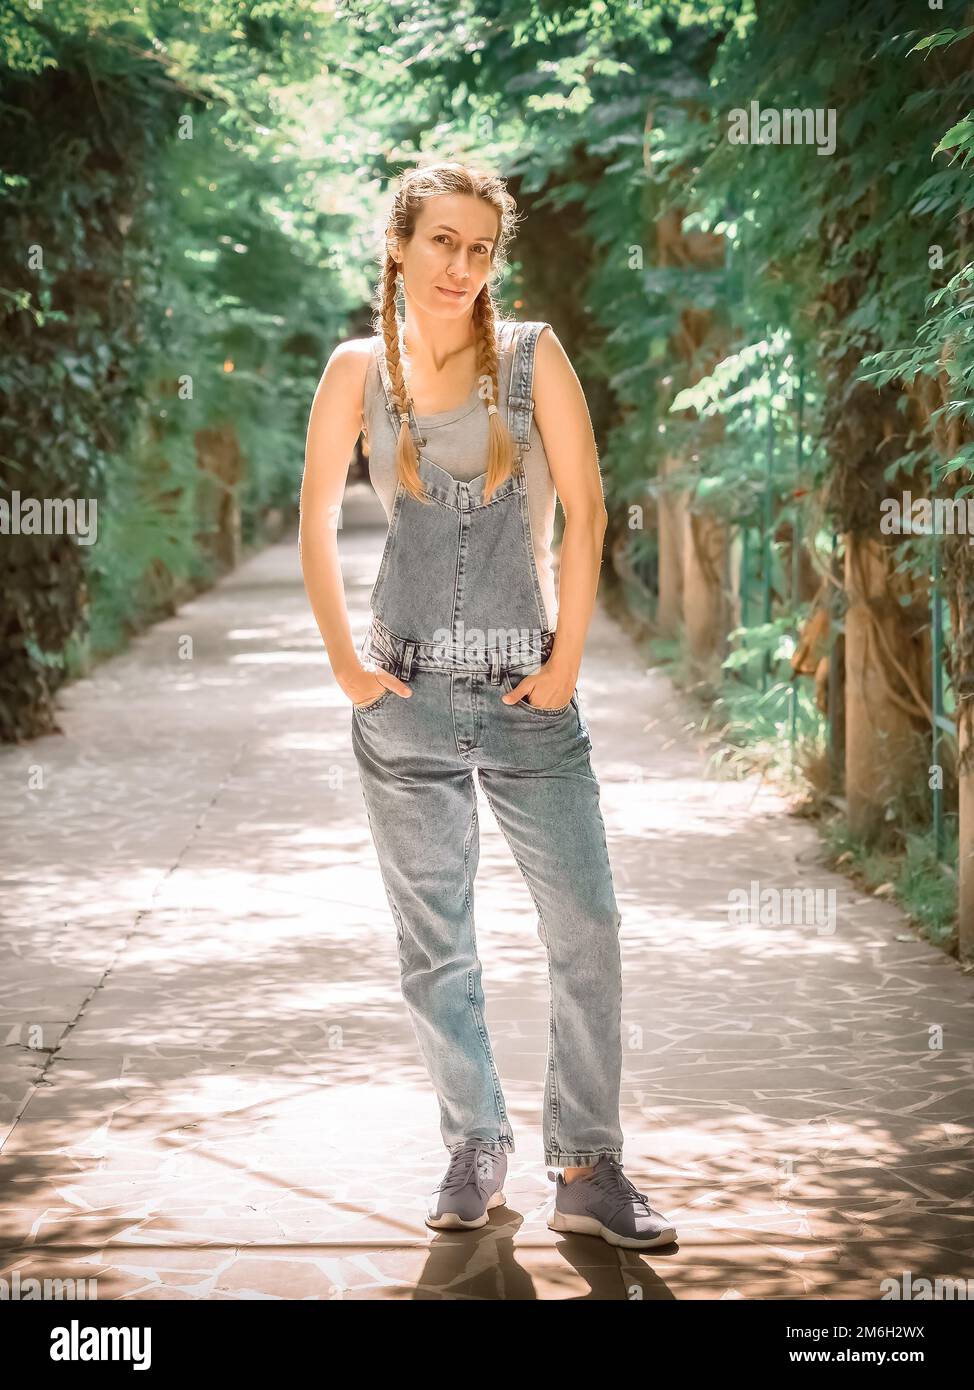 A girl with pigtails in a denim overalls stands with her hands in her pockets on a sunlit alley in the park Stock Photo